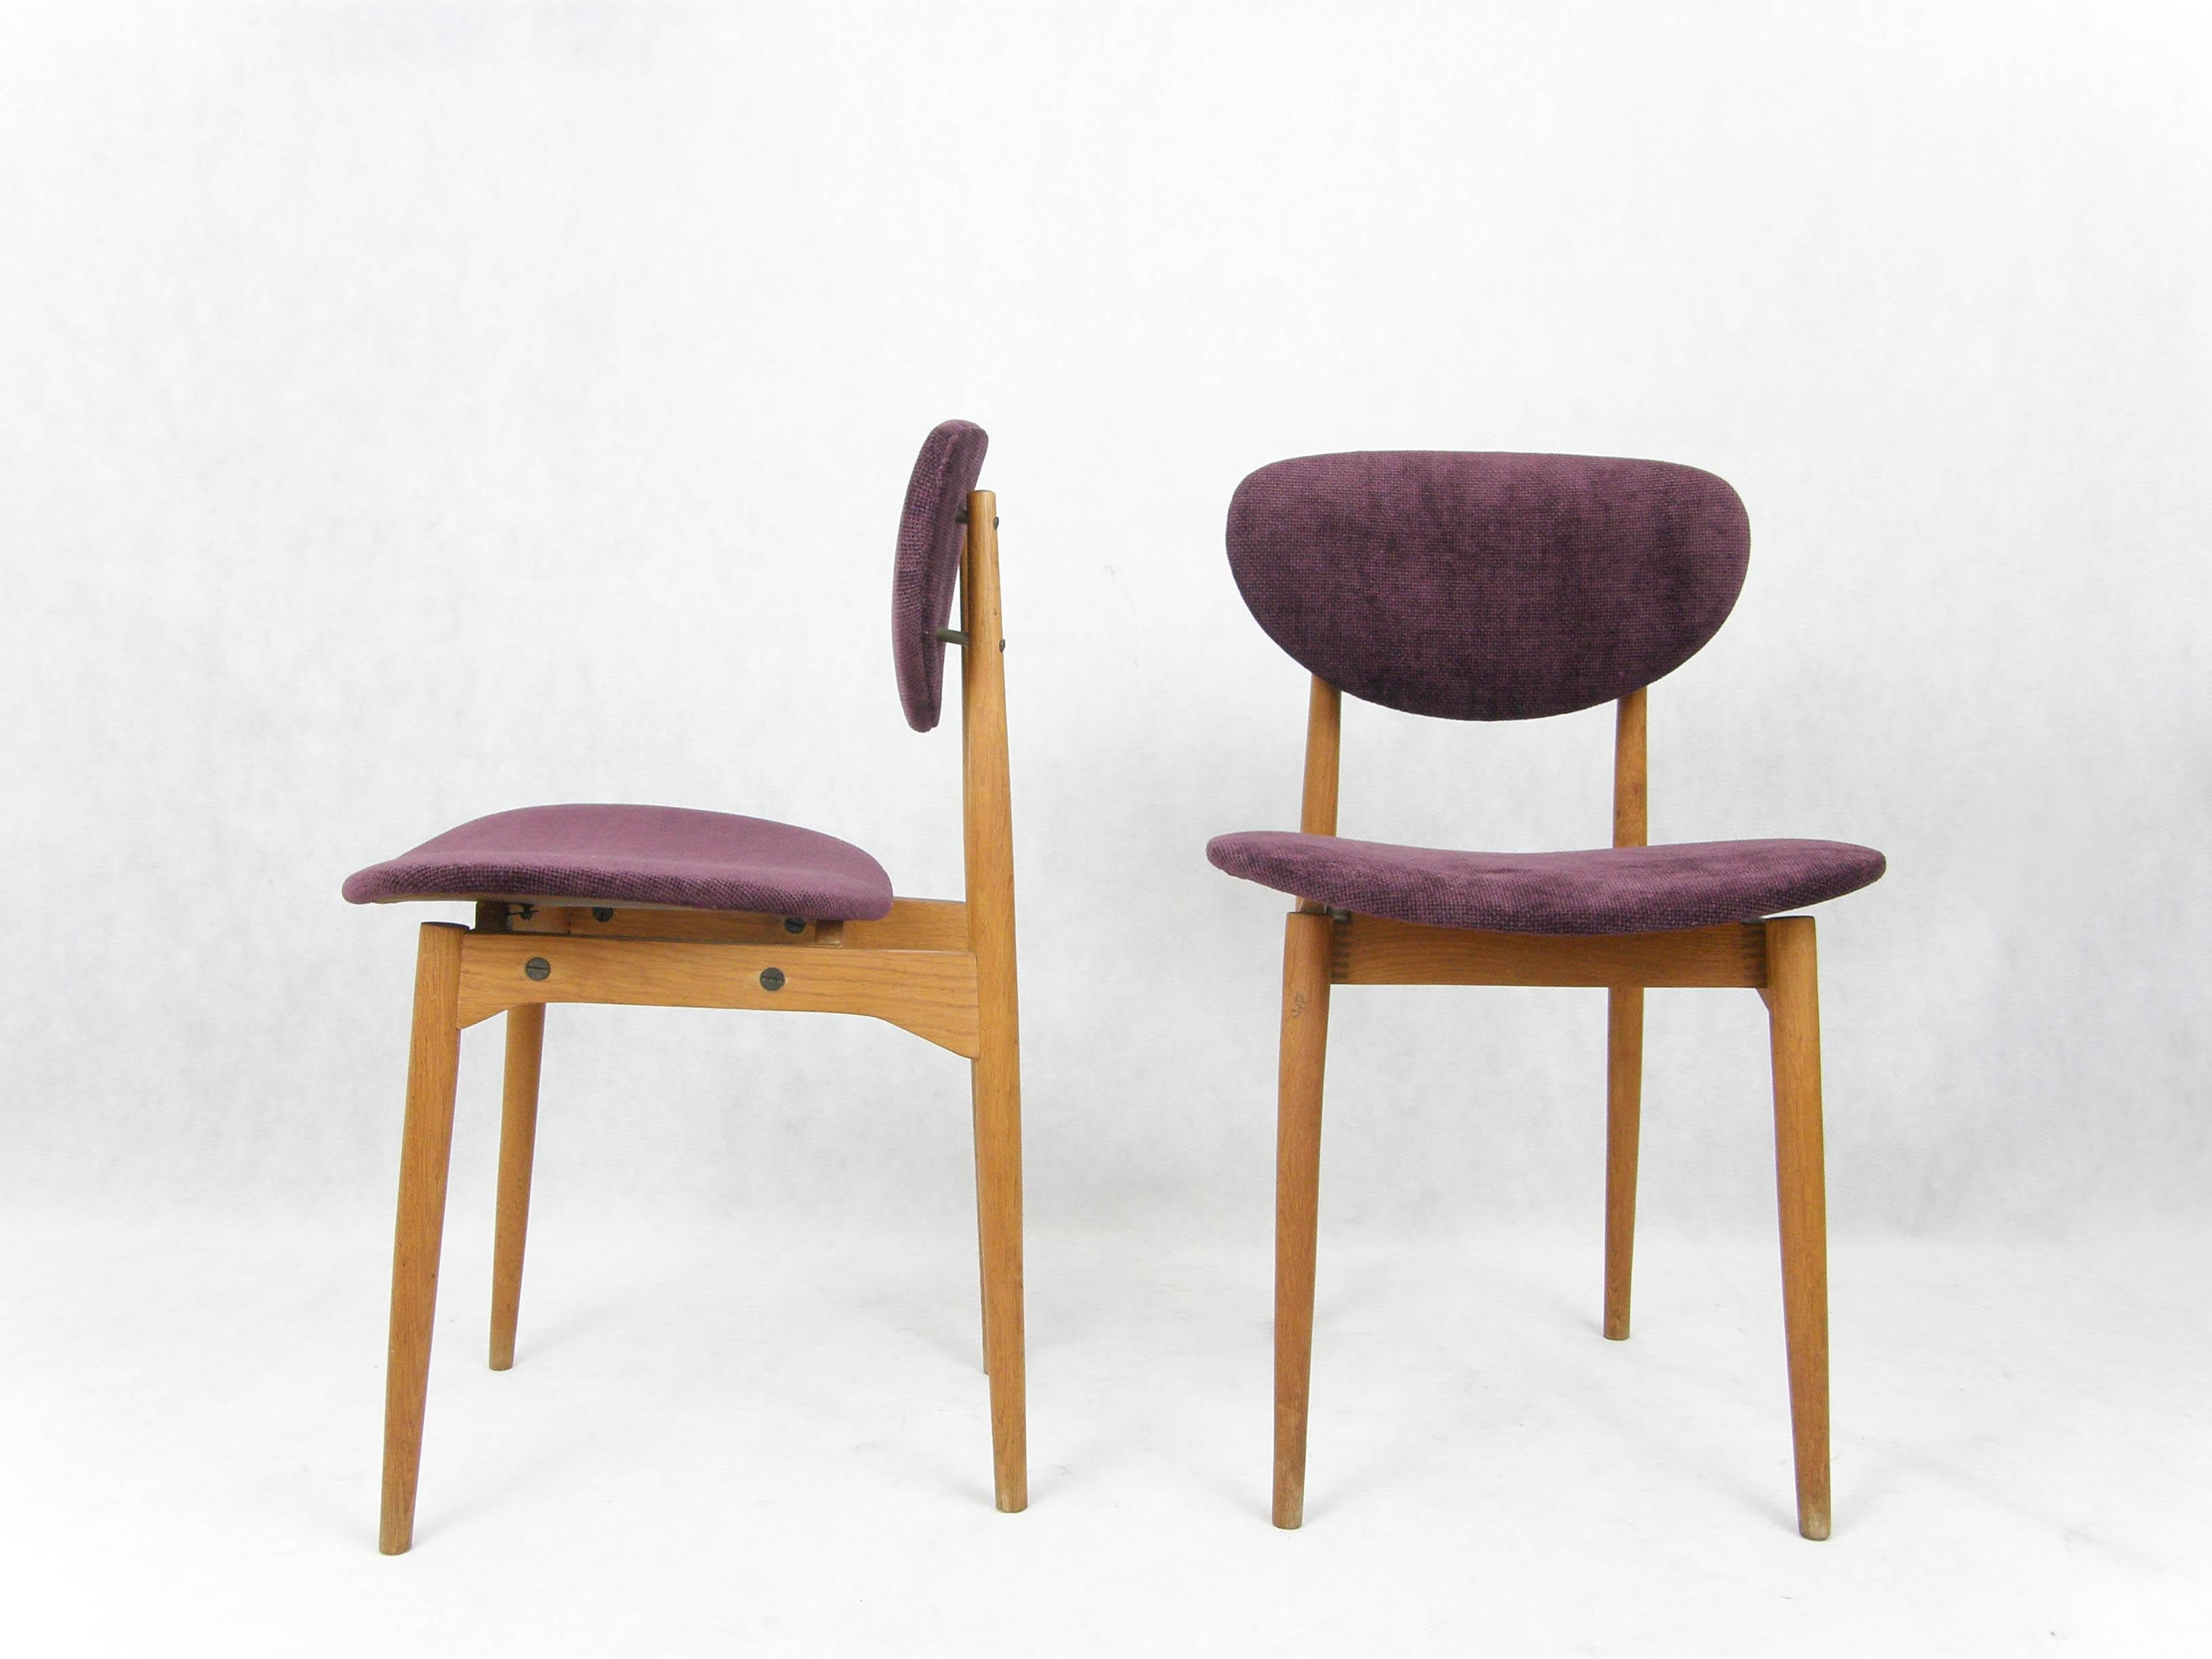 Pair of Italian-made dining or bedroom chairs from the 1950s.
Ritapezzate in purple chenille.

In excellent condition, solid and sturdy.
